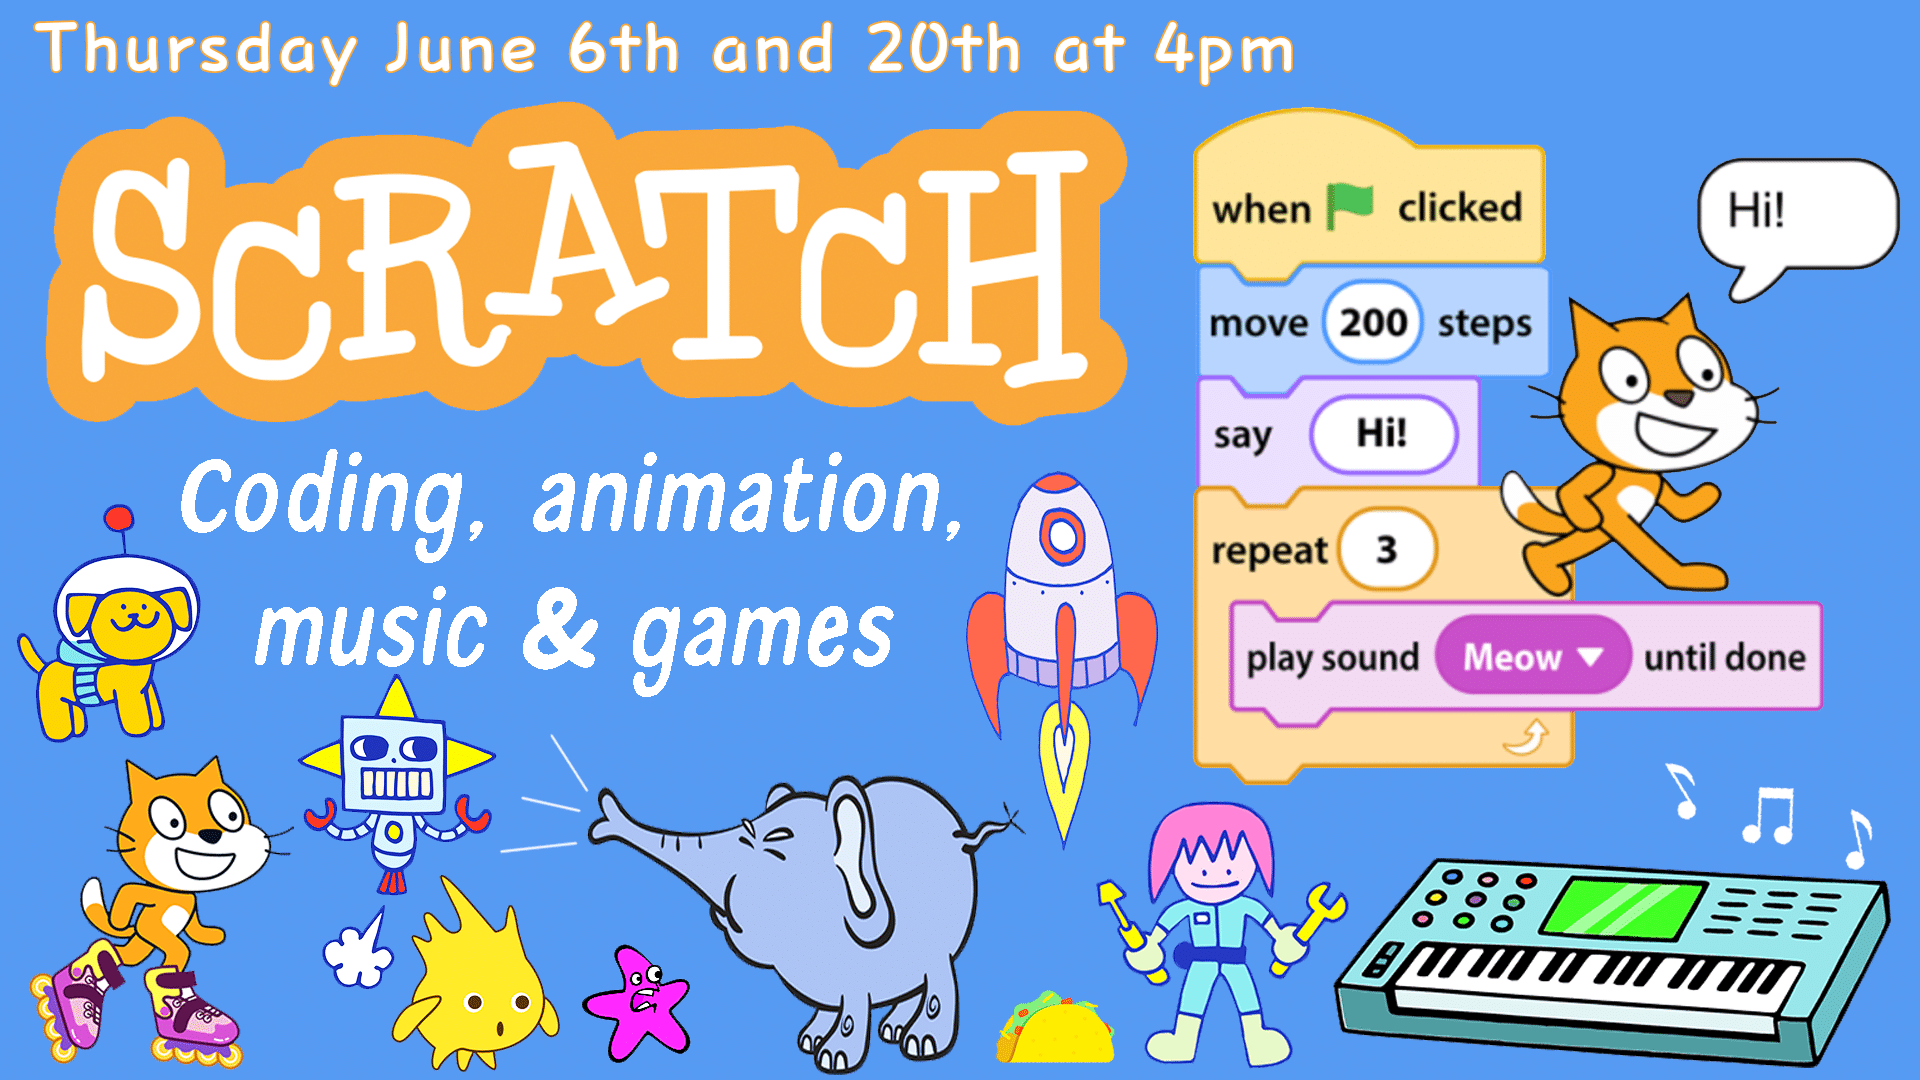 Scratch Club, Thursdays, June 6 and 20th at 4 pm